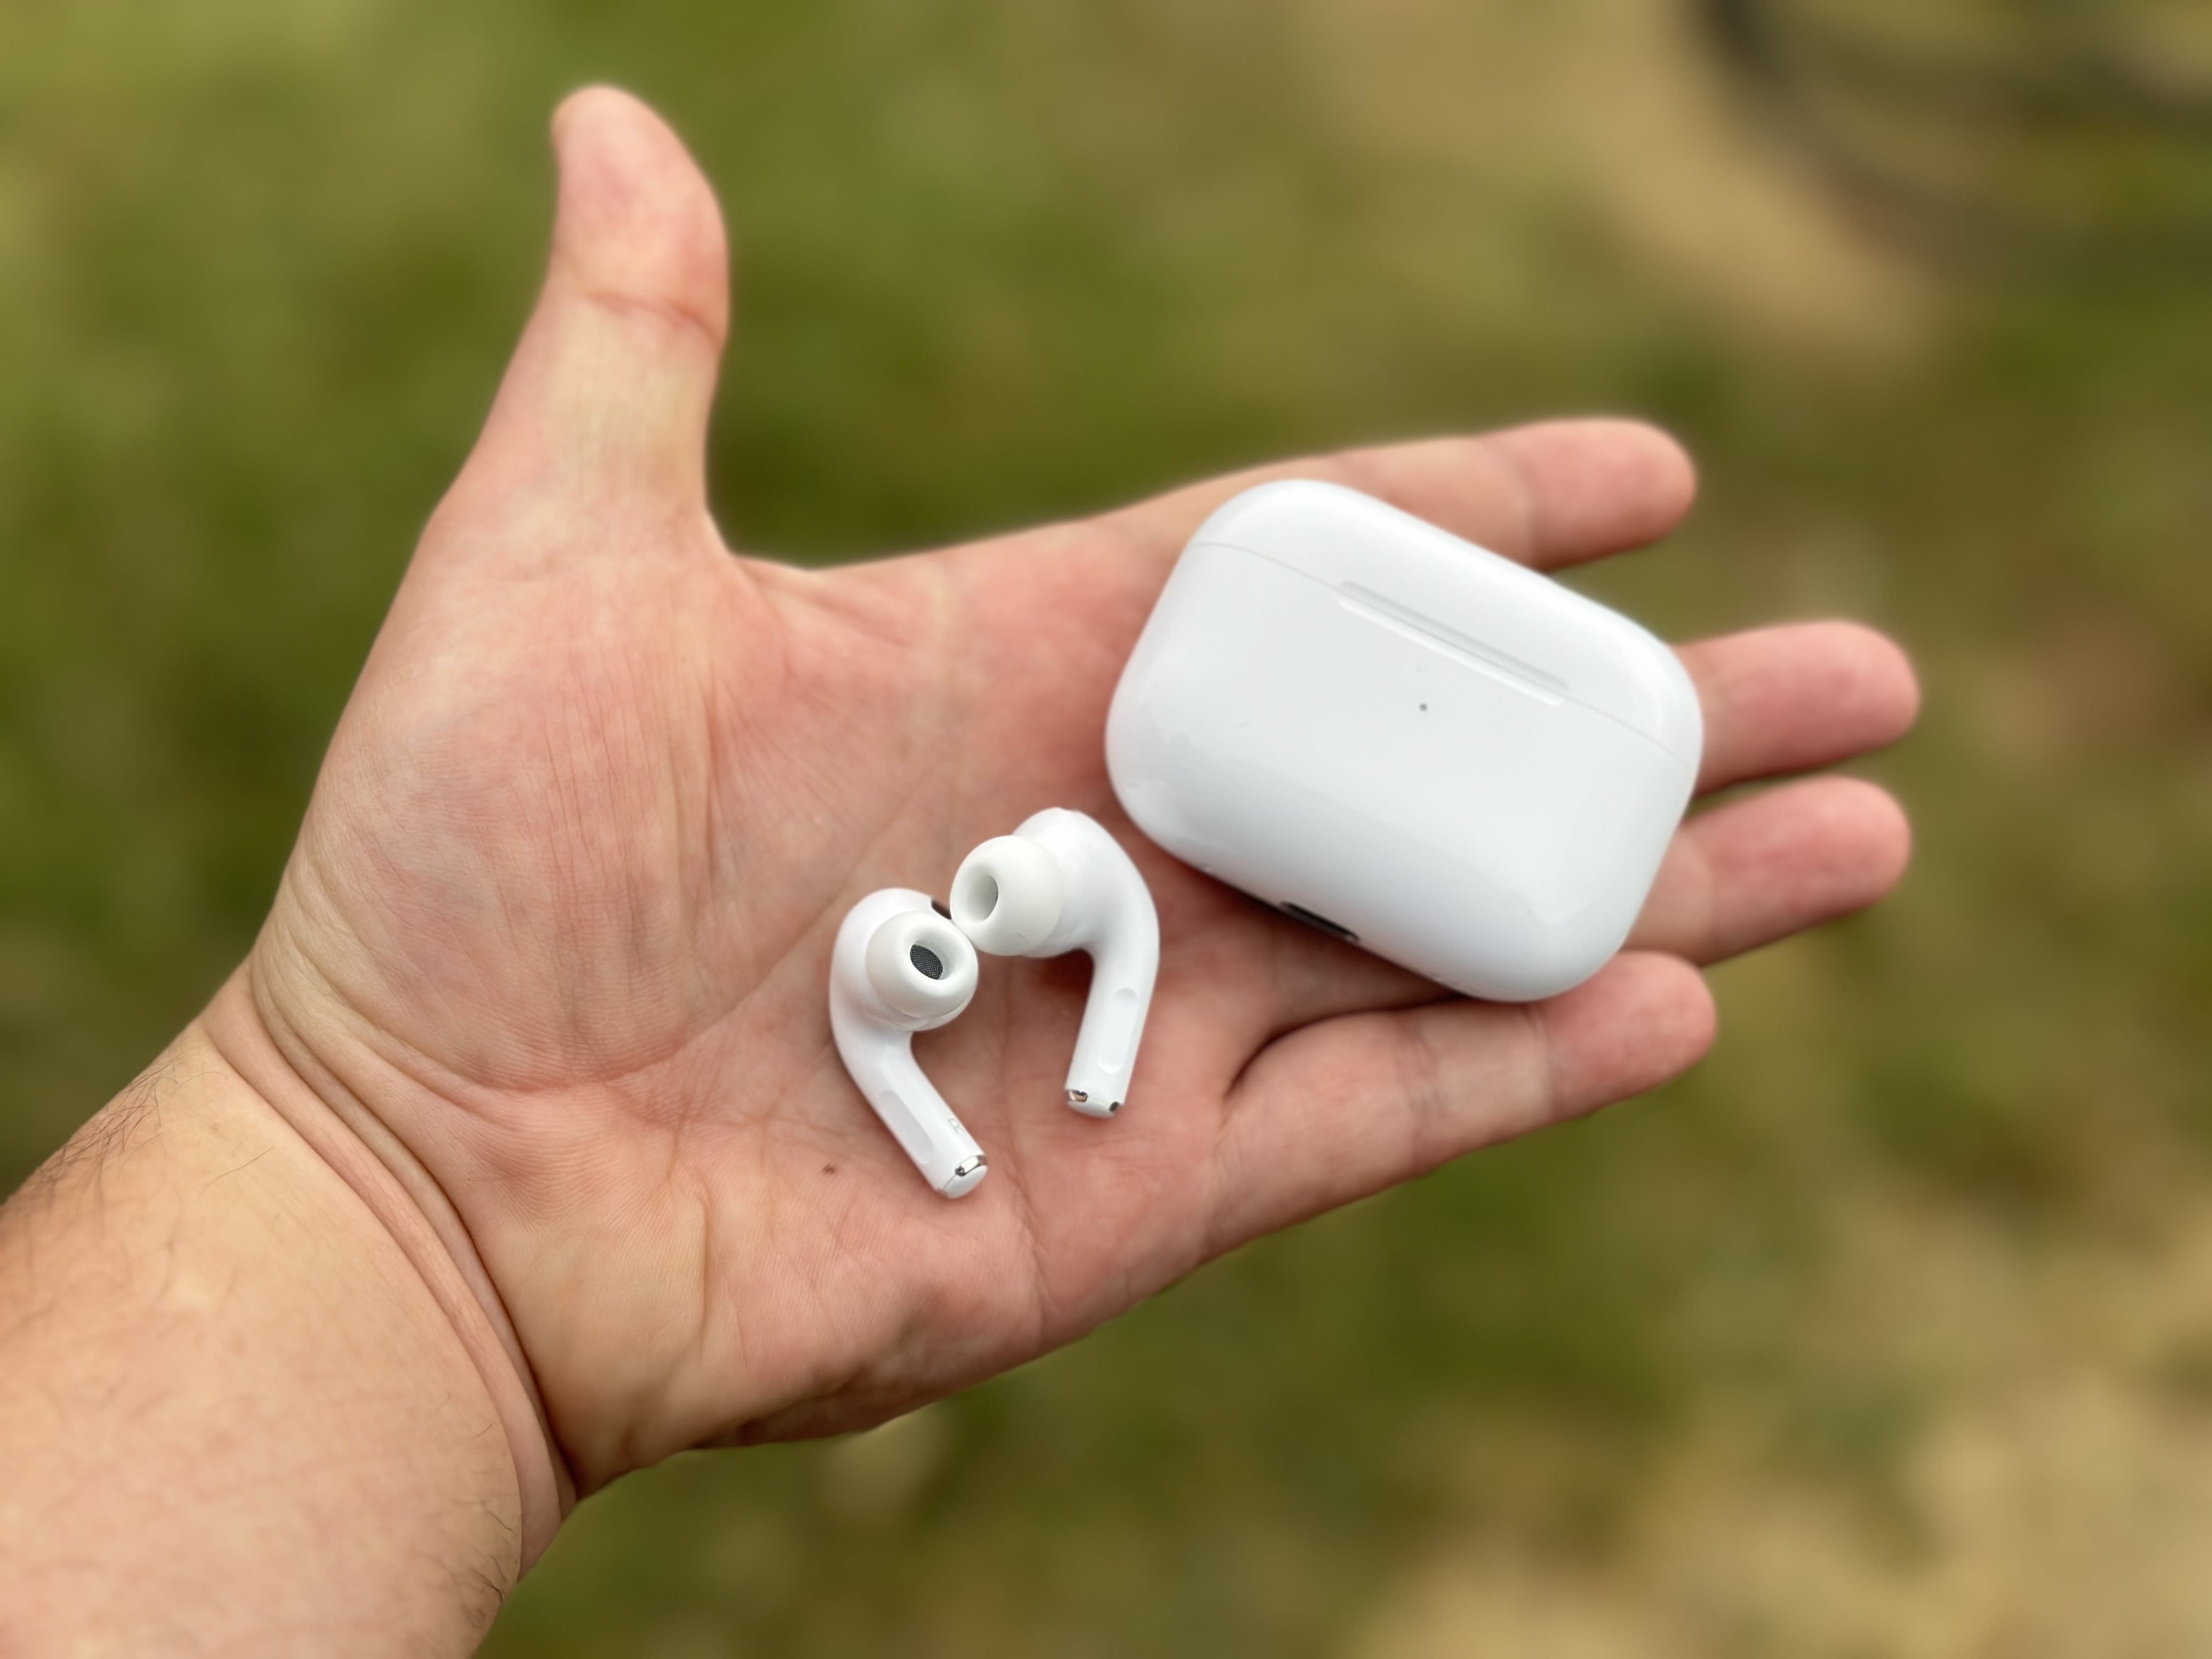 Apple AirPods Max hands-on: Here's what the $549 gets you